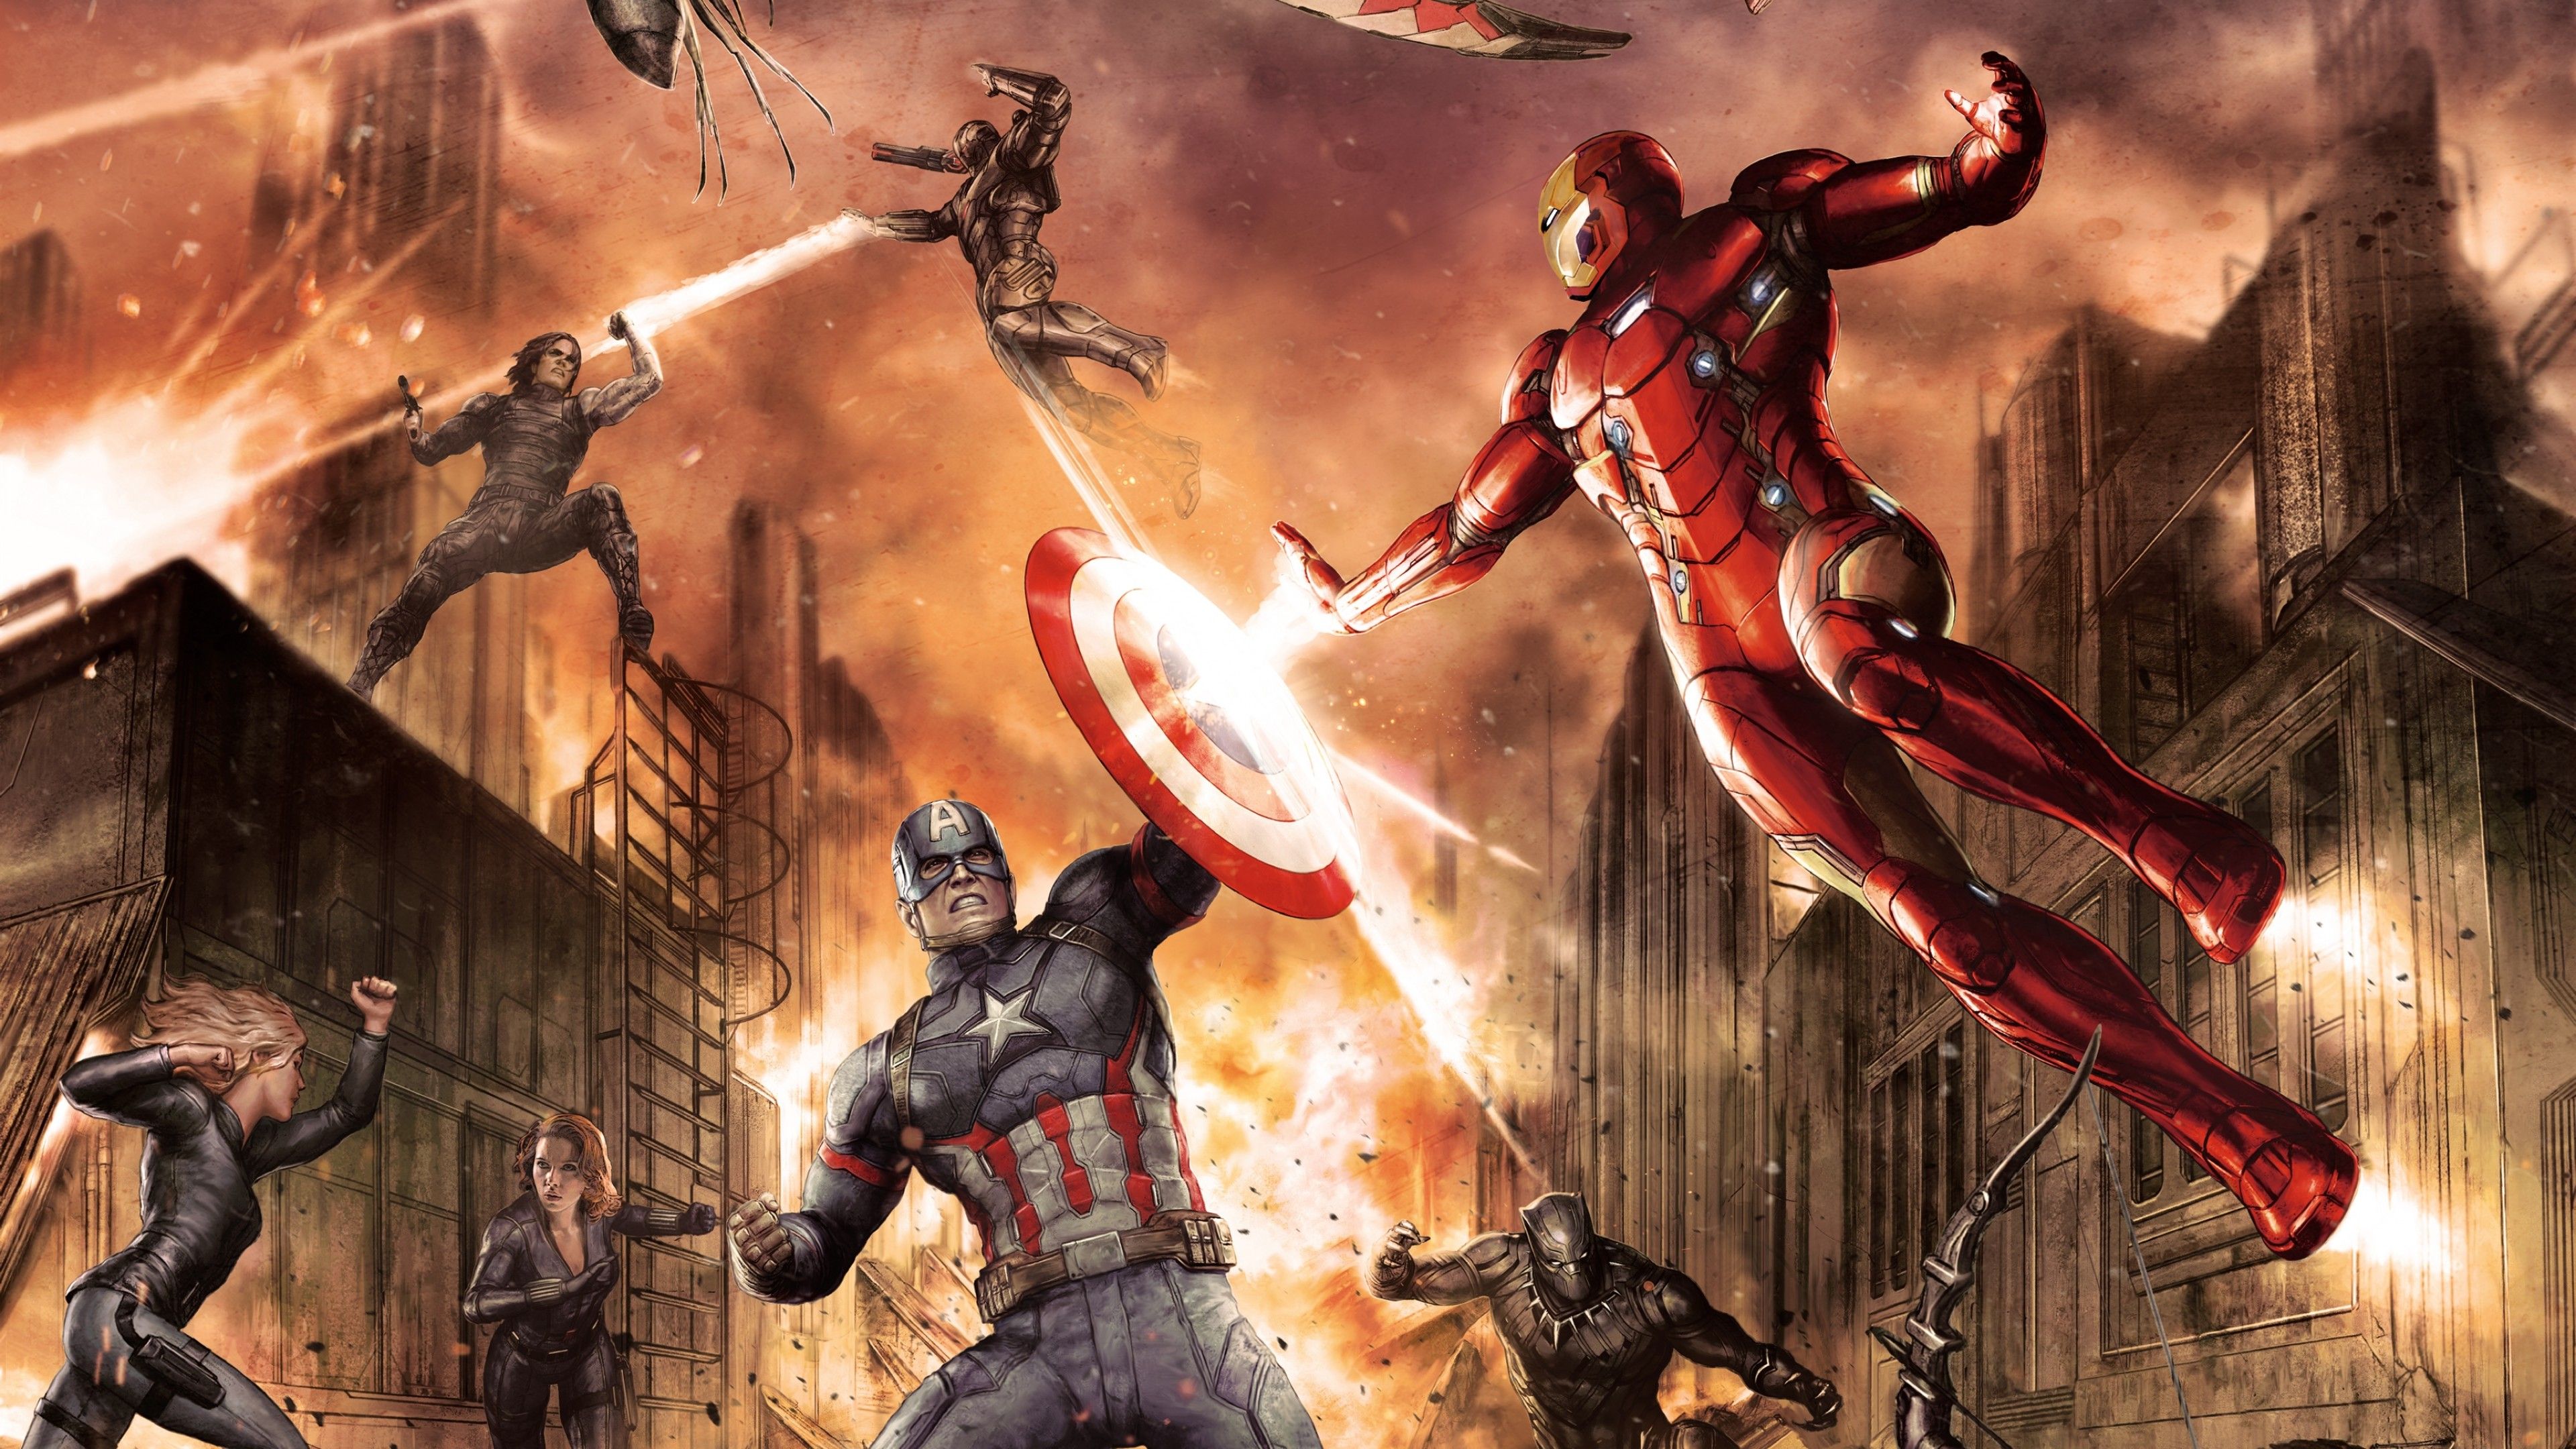 Wallpaper Captain America, Civil War, Iron Man, Fight, Marvel, Concept Art, Movies,. Wallpaper for iPhone, Android, Mobile and Desktop